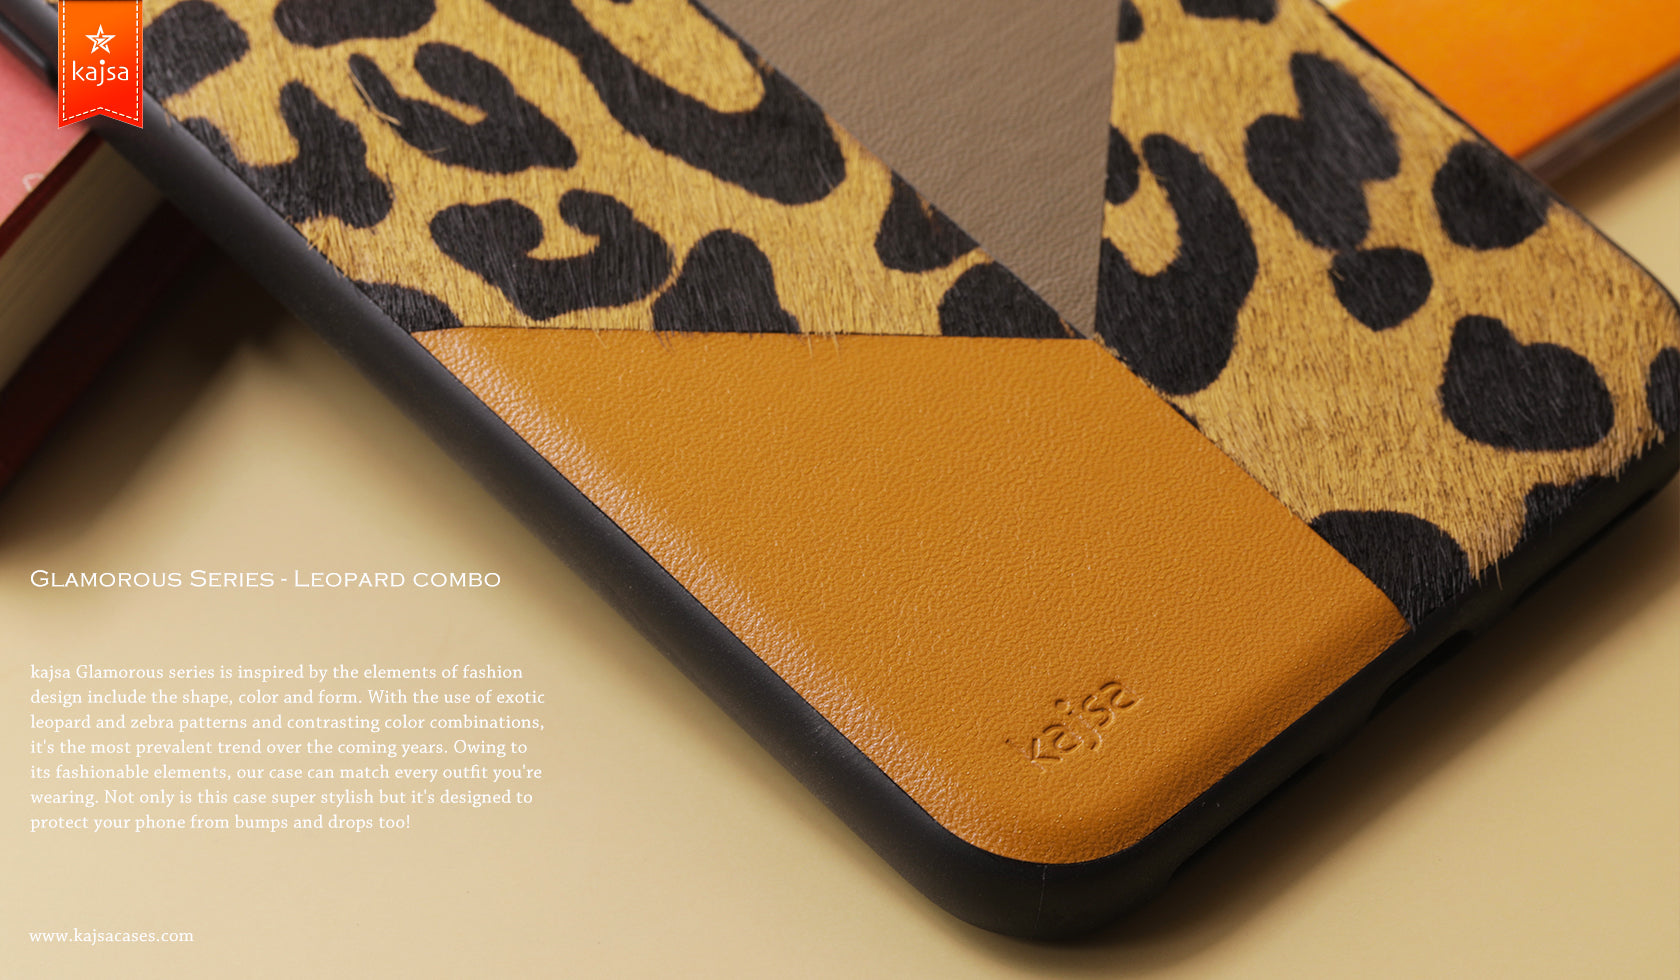 Glamorous Collection - Leopard Combo Back Case for iPhone 11 / 11 Pro / 11 Pro Max-Phone Case- phone case - phone cases- phone cover- iphone cover- iphone case- iphone cases- leather case- leather cases- DIYCASE - custom case - leather cover - hand strap case - croco pattern case - snake pattern case - carbon fiber phone case - phone case brand - unique phone case - high quality - phone case brand - protective case - buy phone case hong kong - online buy phone case - iphone‎手機殼 - 客製化手機殼 - samsung ‎手機殼 - 香港手